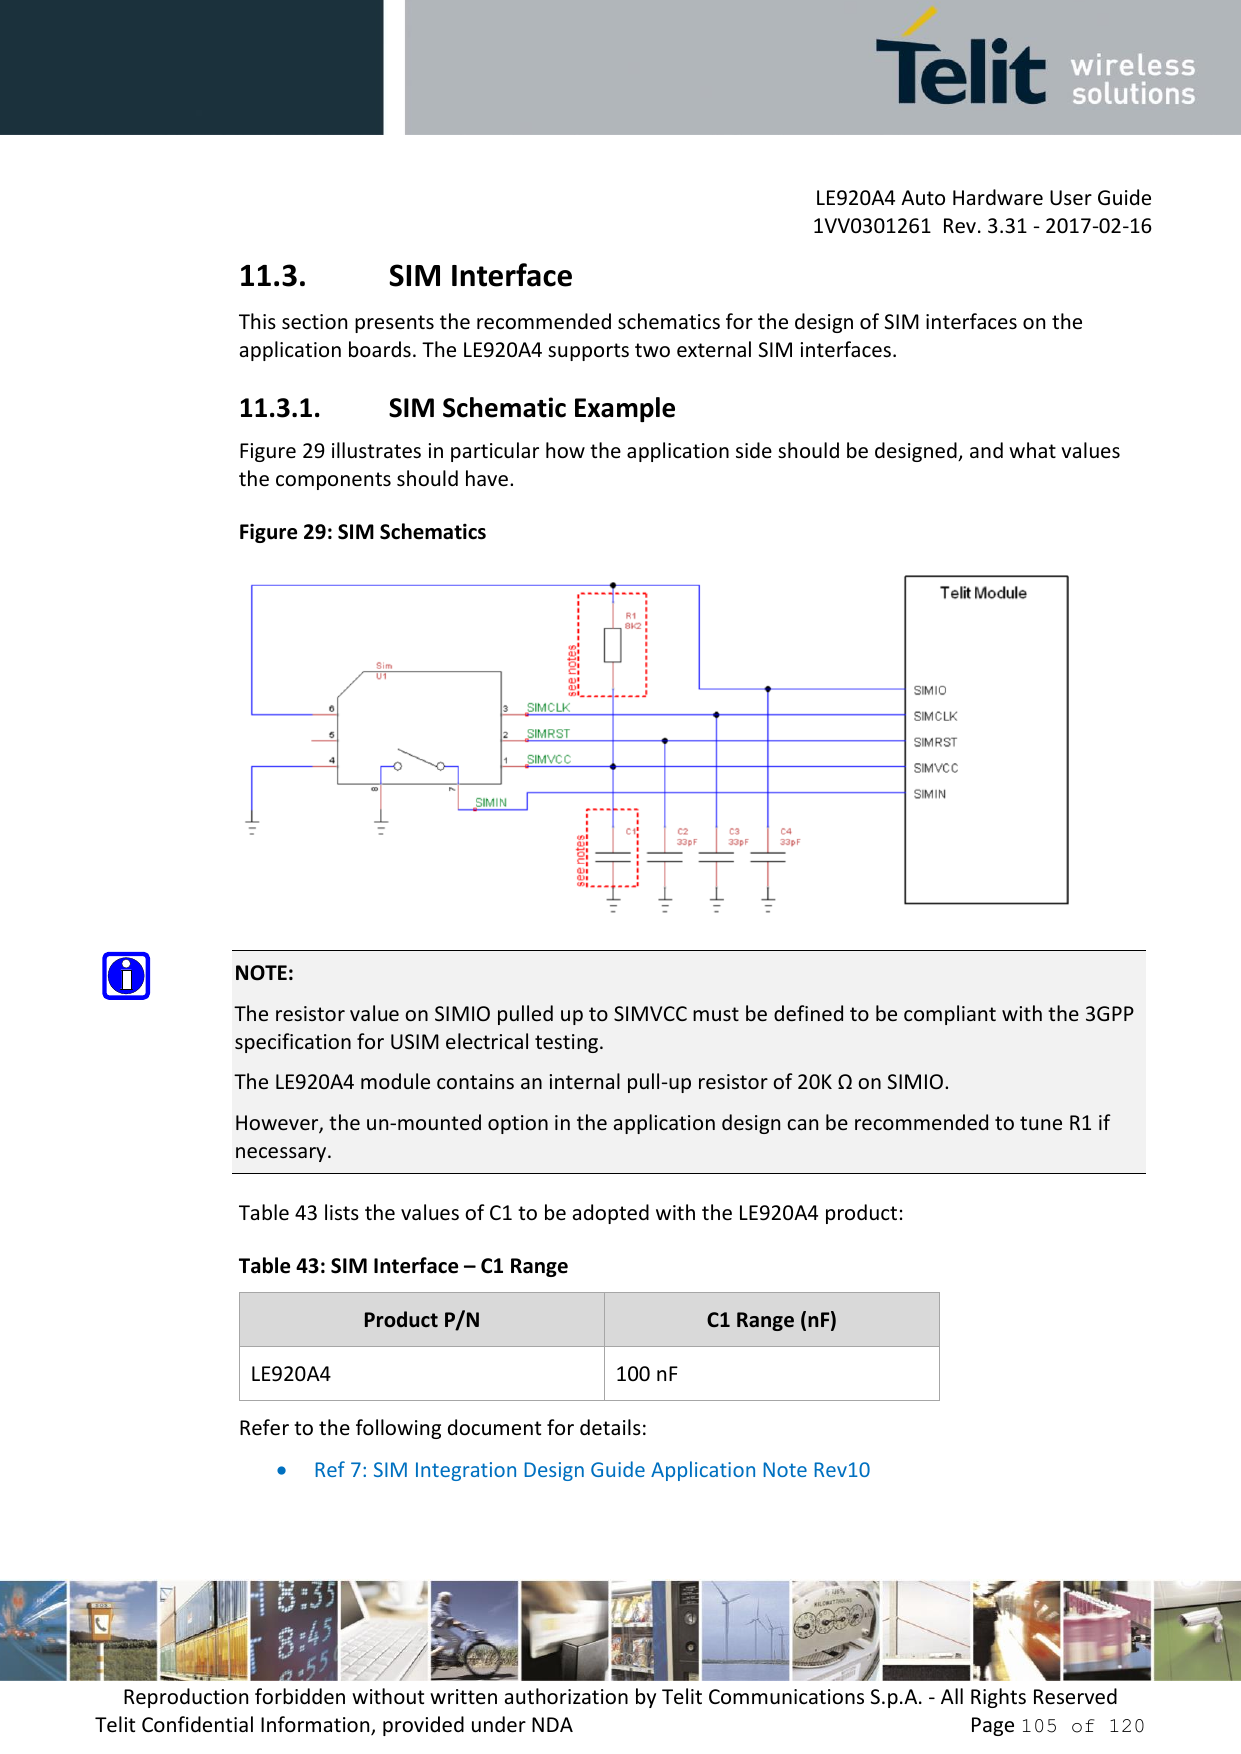         LE920A4 Auto Hardware User Guide     1VV0301261  Rev. 3.31 - 2017-02-16 Reproduction forbidden without written authorization by Telit Communications S.p.A. - All Rights Reserved Telit Confidential Information, provided under NDA                 Page 105 of 120 11.3. SIM Interface This section presents the recommended schematics for the design of SIM interfaces on the application boards. The LE920A4 supports two external SIM interfaces. 11.3.1. SIM Schematic Example Figure 29 illustrates in particular how the application side should be designed, and what values the components should have. Figure 29: SIM Schematics   NOTE: The resistor value on SIMIO pulled up to SIMVCC must be defined to be compliant with the 3GPP specification for USIM electrical testing. The LE920A4 module contains an internal pull-up resistor of 20K Ω on SIMIO. However, the un-mounted option in the application design can be recommended to tune R1 if necessary. Table 43 lists the values of C1 to be adopted with the LE920A4 product: Table 43: SIM Interface – C1 Range Product P/N C1 Range (nF) LE920A4 100 nF Refer to the following document for details:  Ref 7: SIM Integration Design Guide Application Note Rev10  